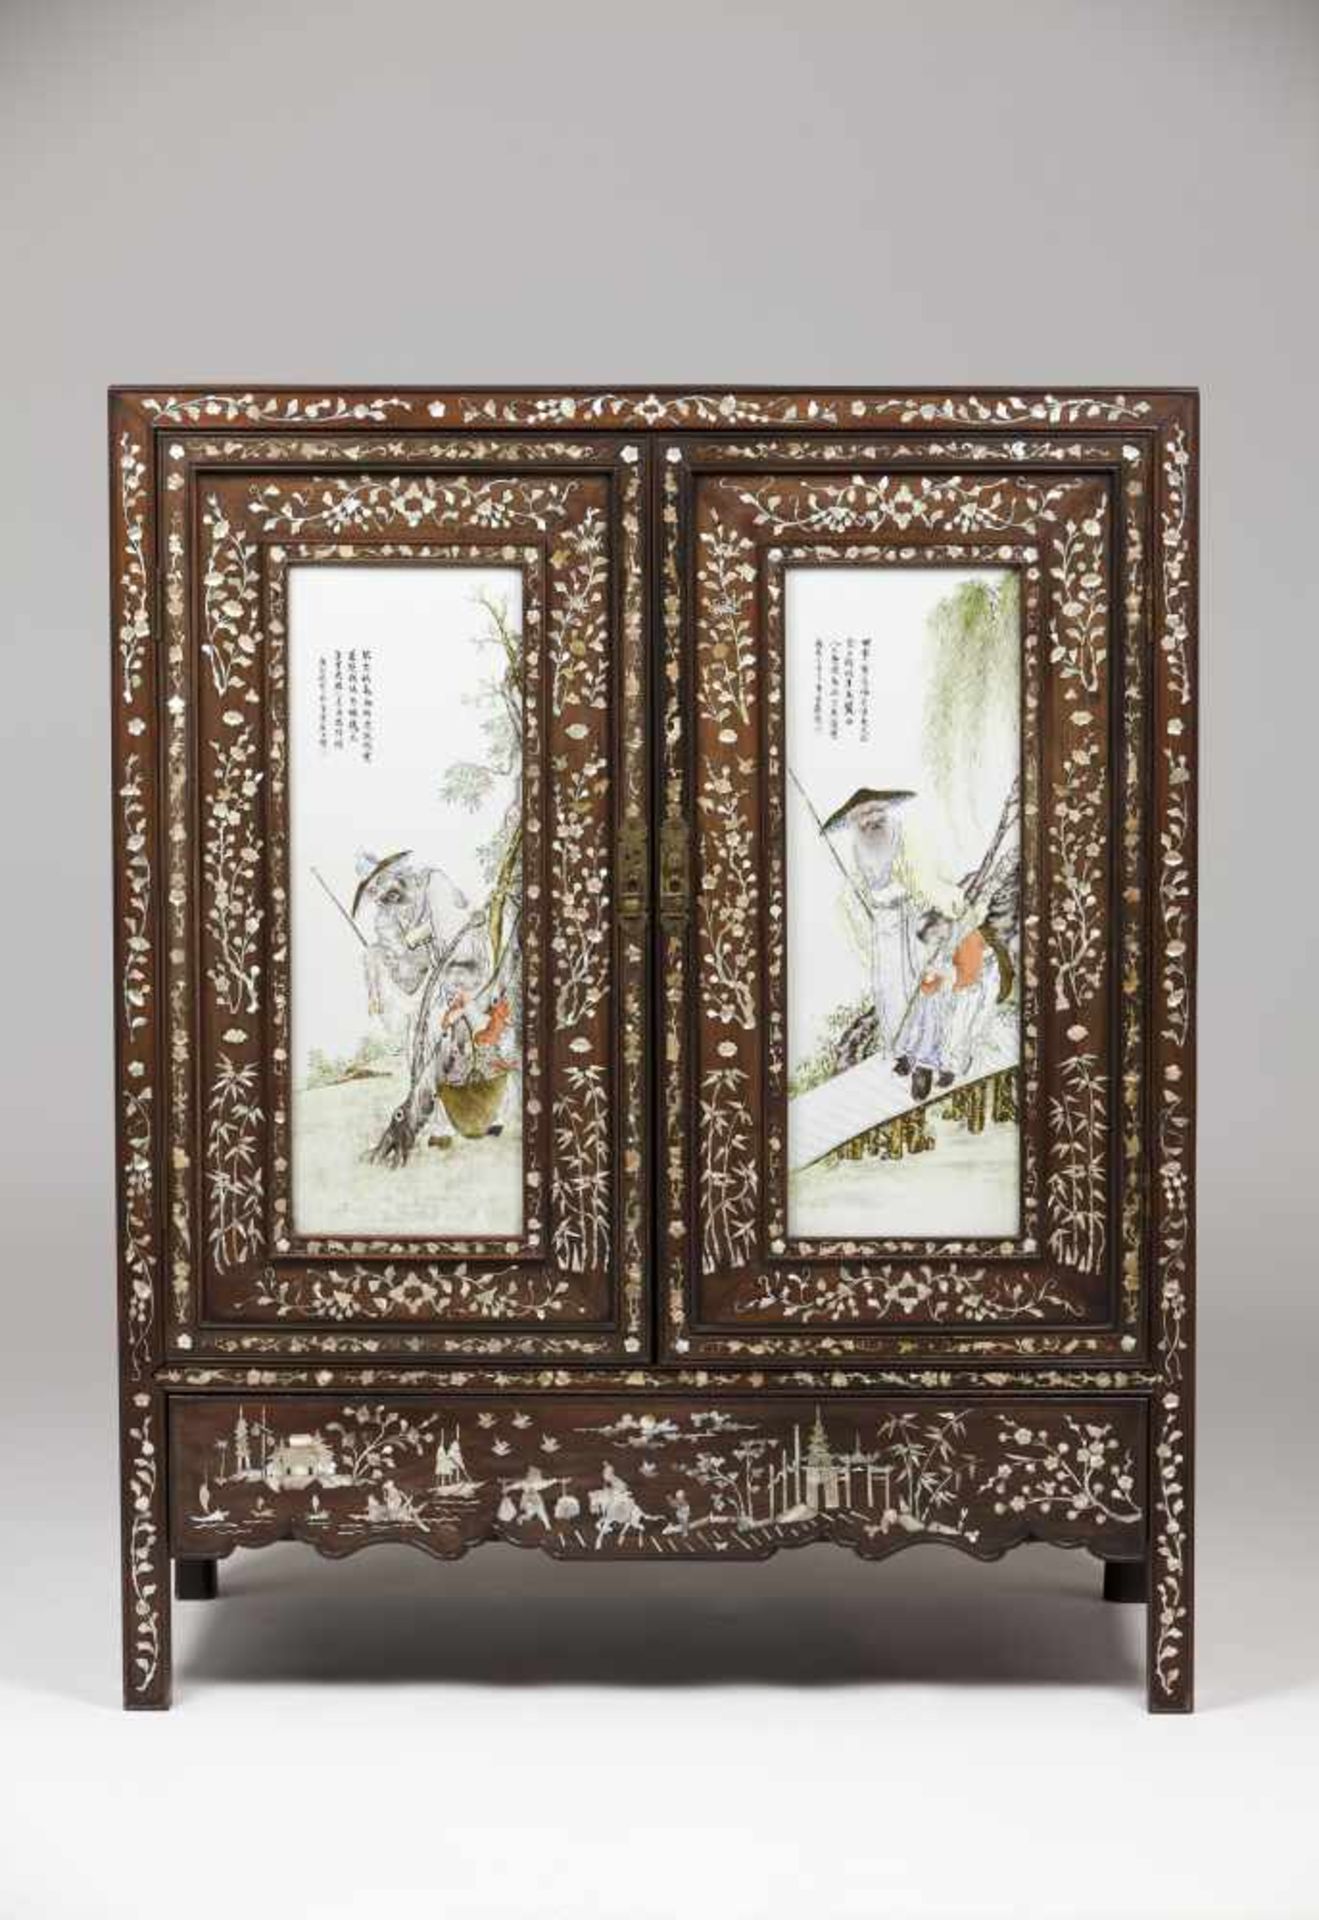 A low cupboardTamarind with mother-of-pearl inlaysDoor fronts with Chinese porcelain plaques of